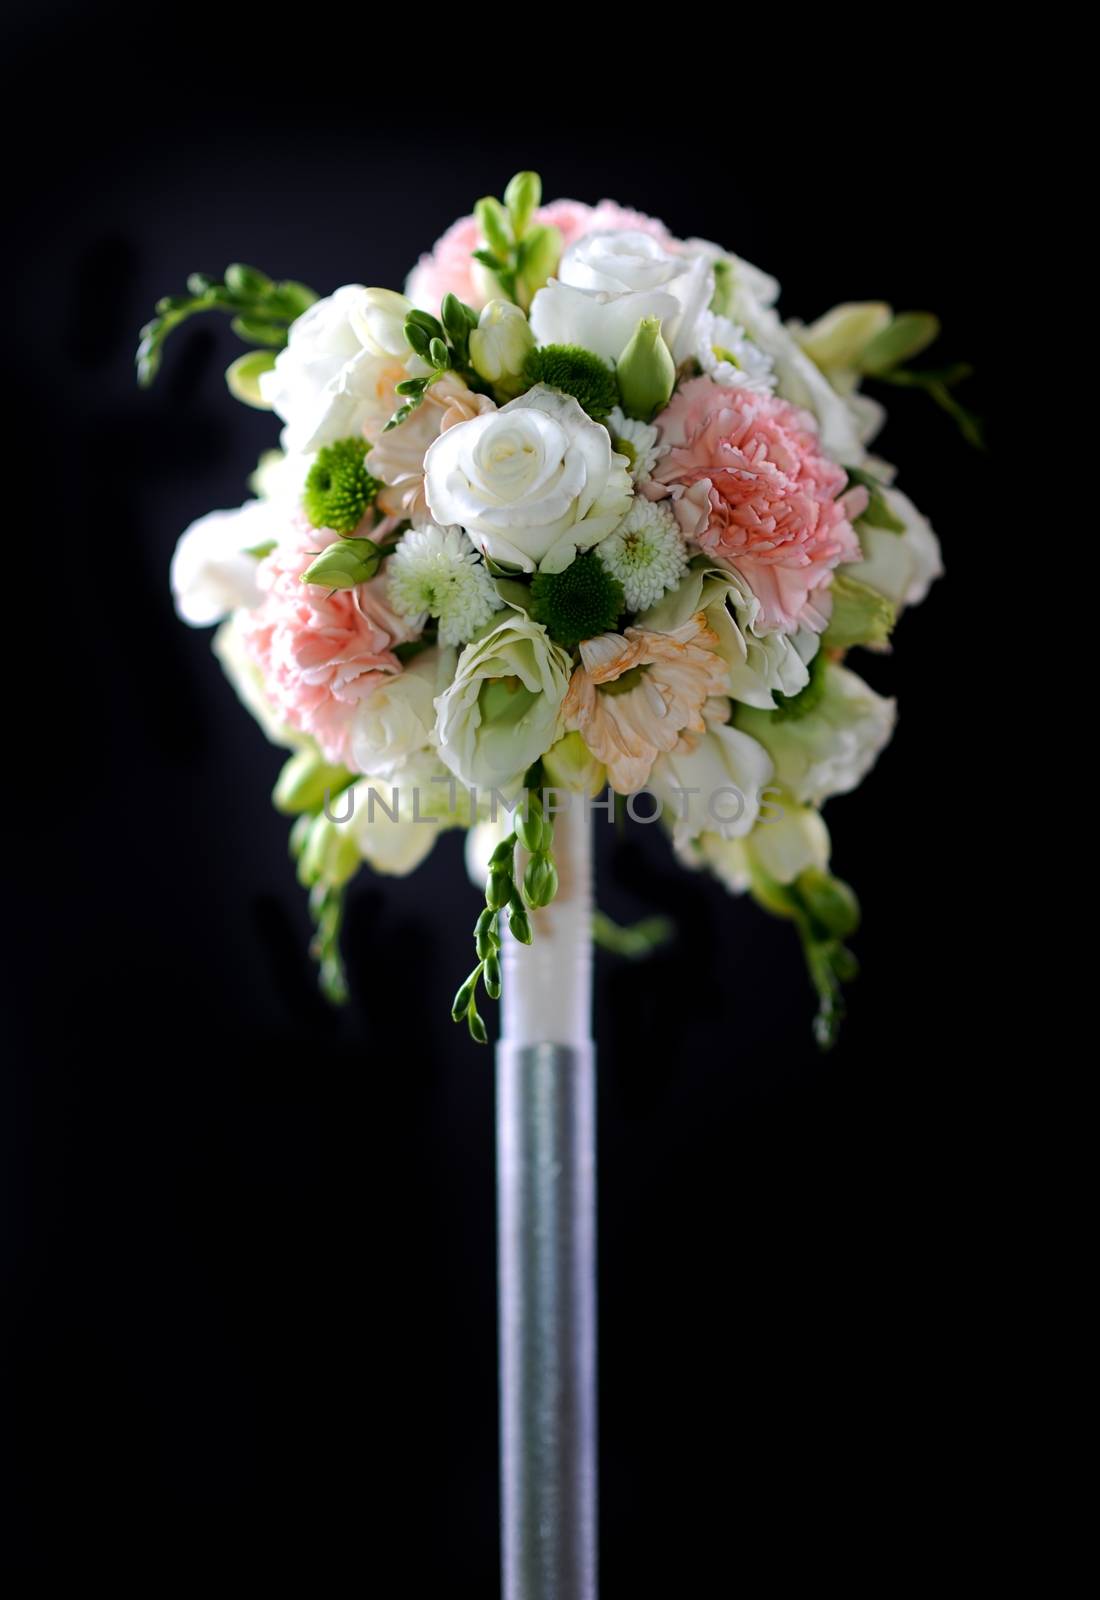 Deco Bouquet by welcomia